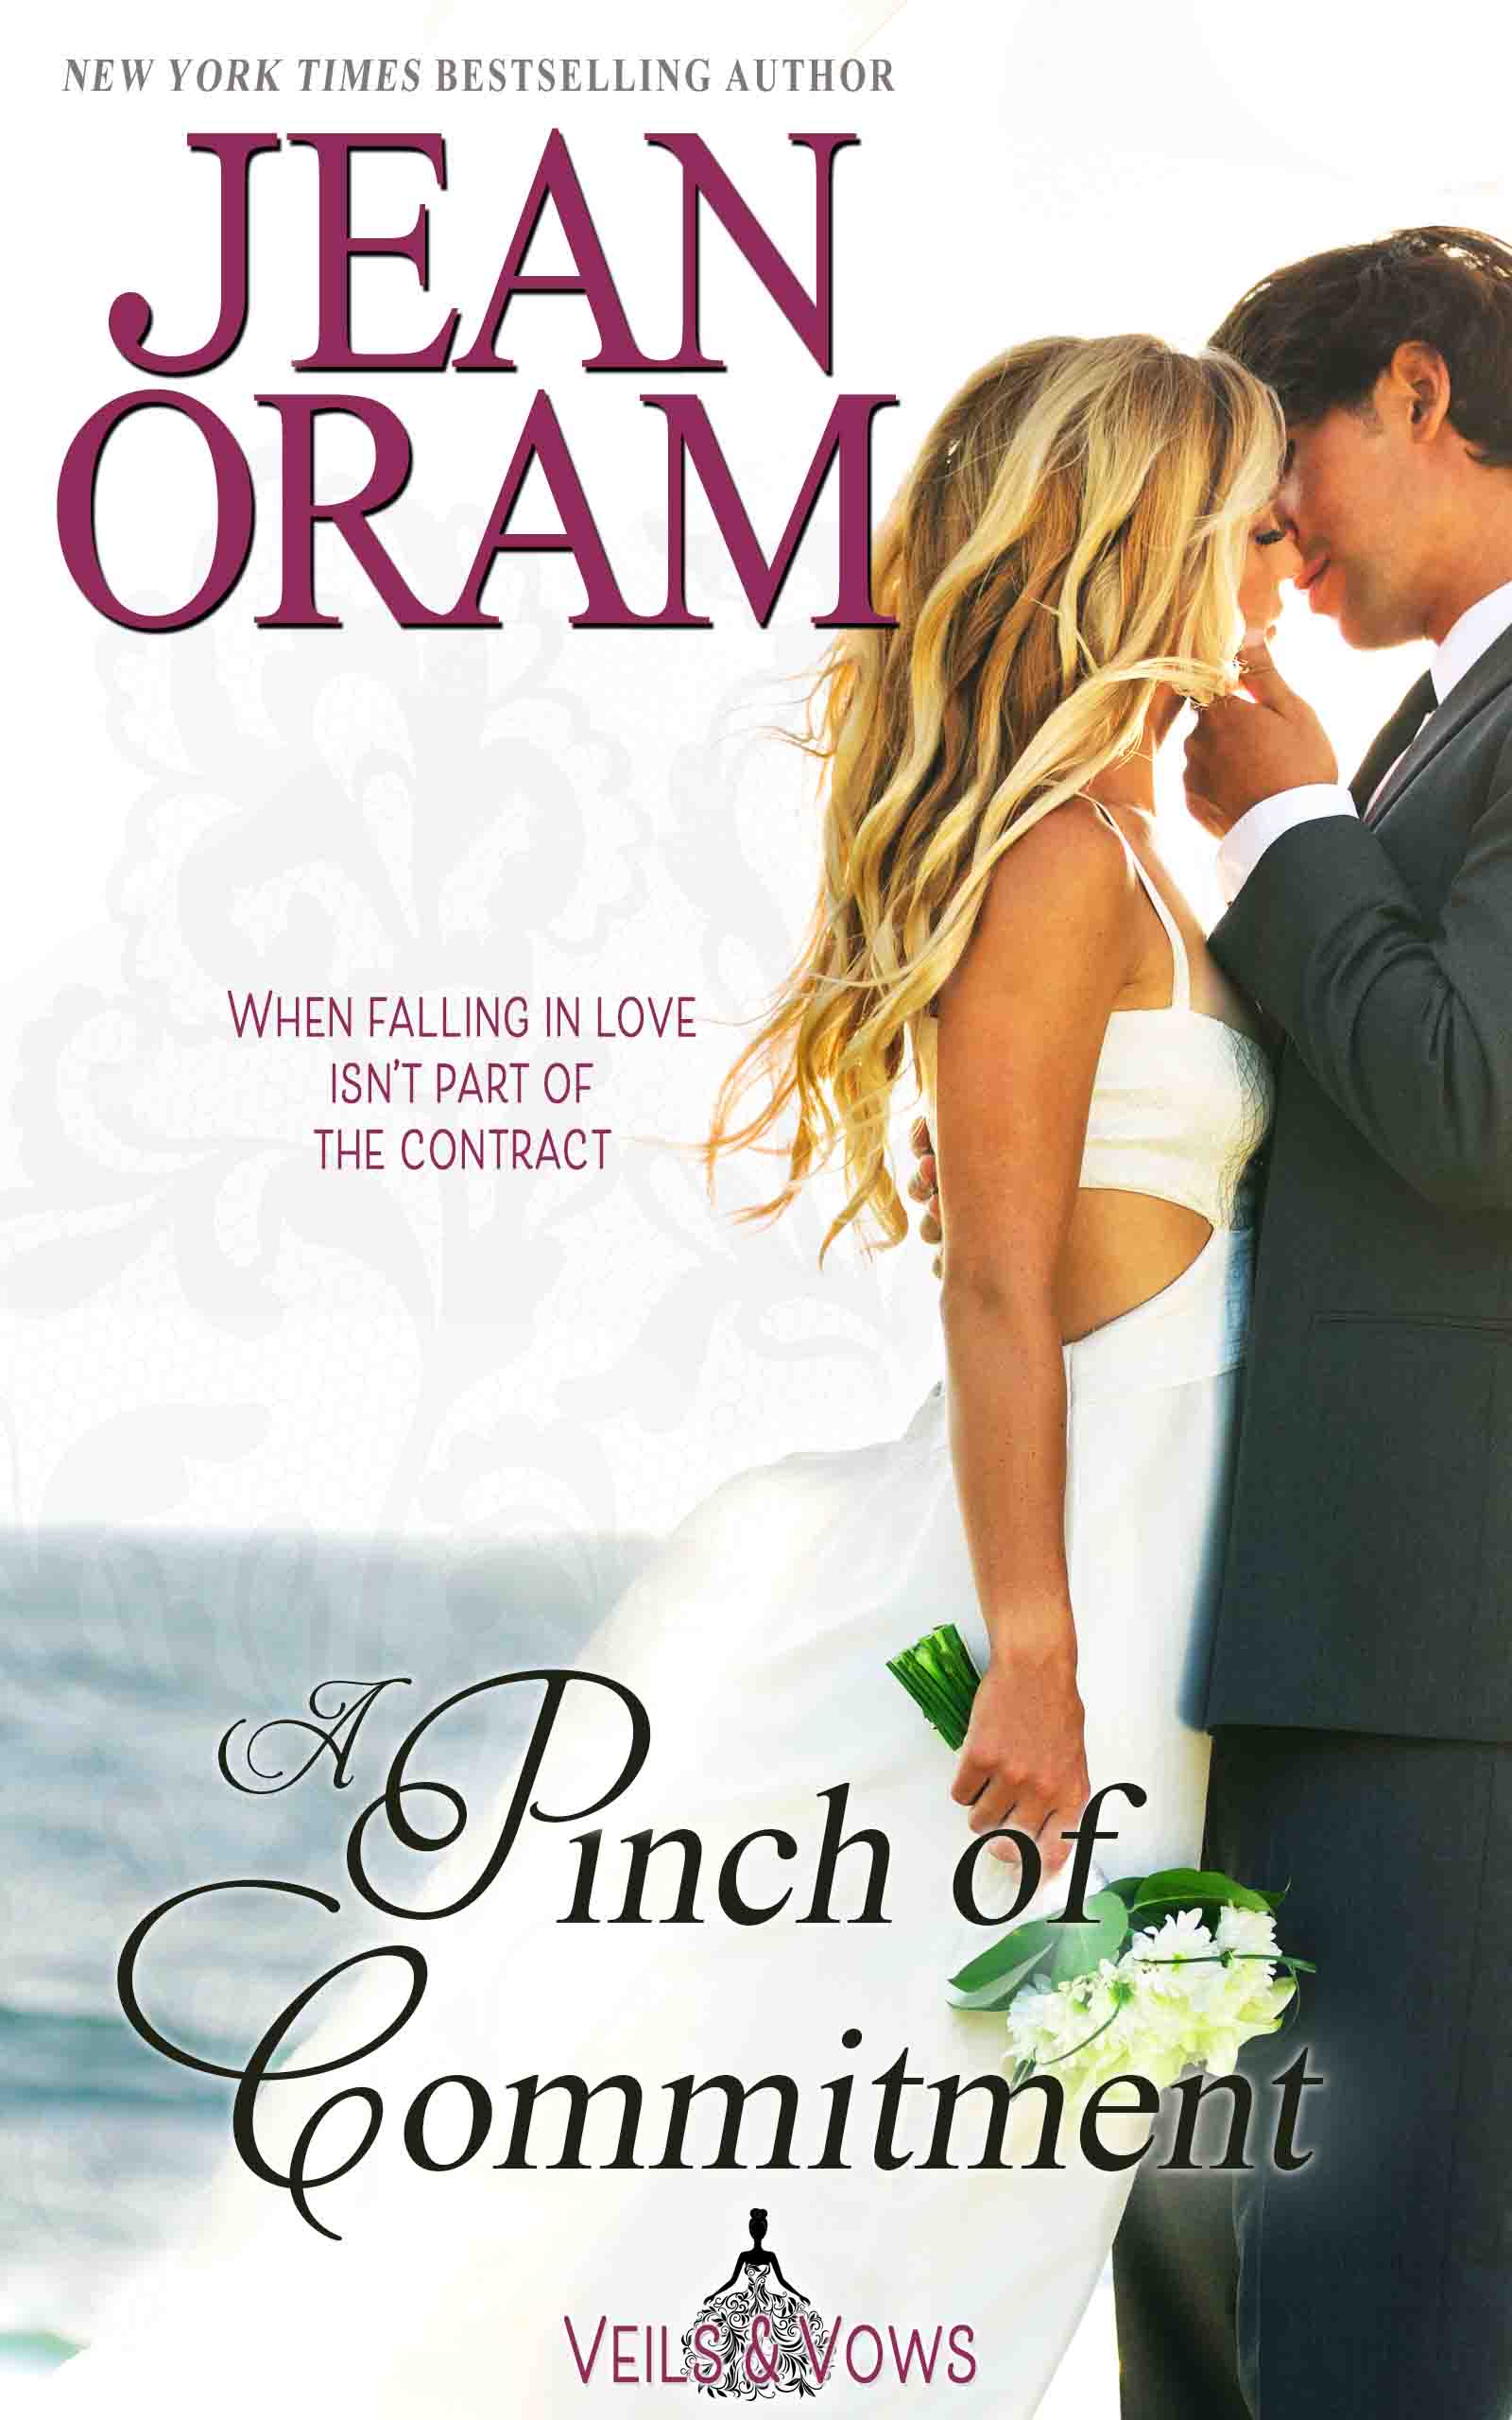 Veils and vows series by Jean Oram. A Pinch of Commitment. Lily and Ethan Mattson. A Marriage of convenience between friends. A fake marriage of conveience romance. Sweet MOC small town romance. Book 2 in the Veils and Vows series by Jean Oram.